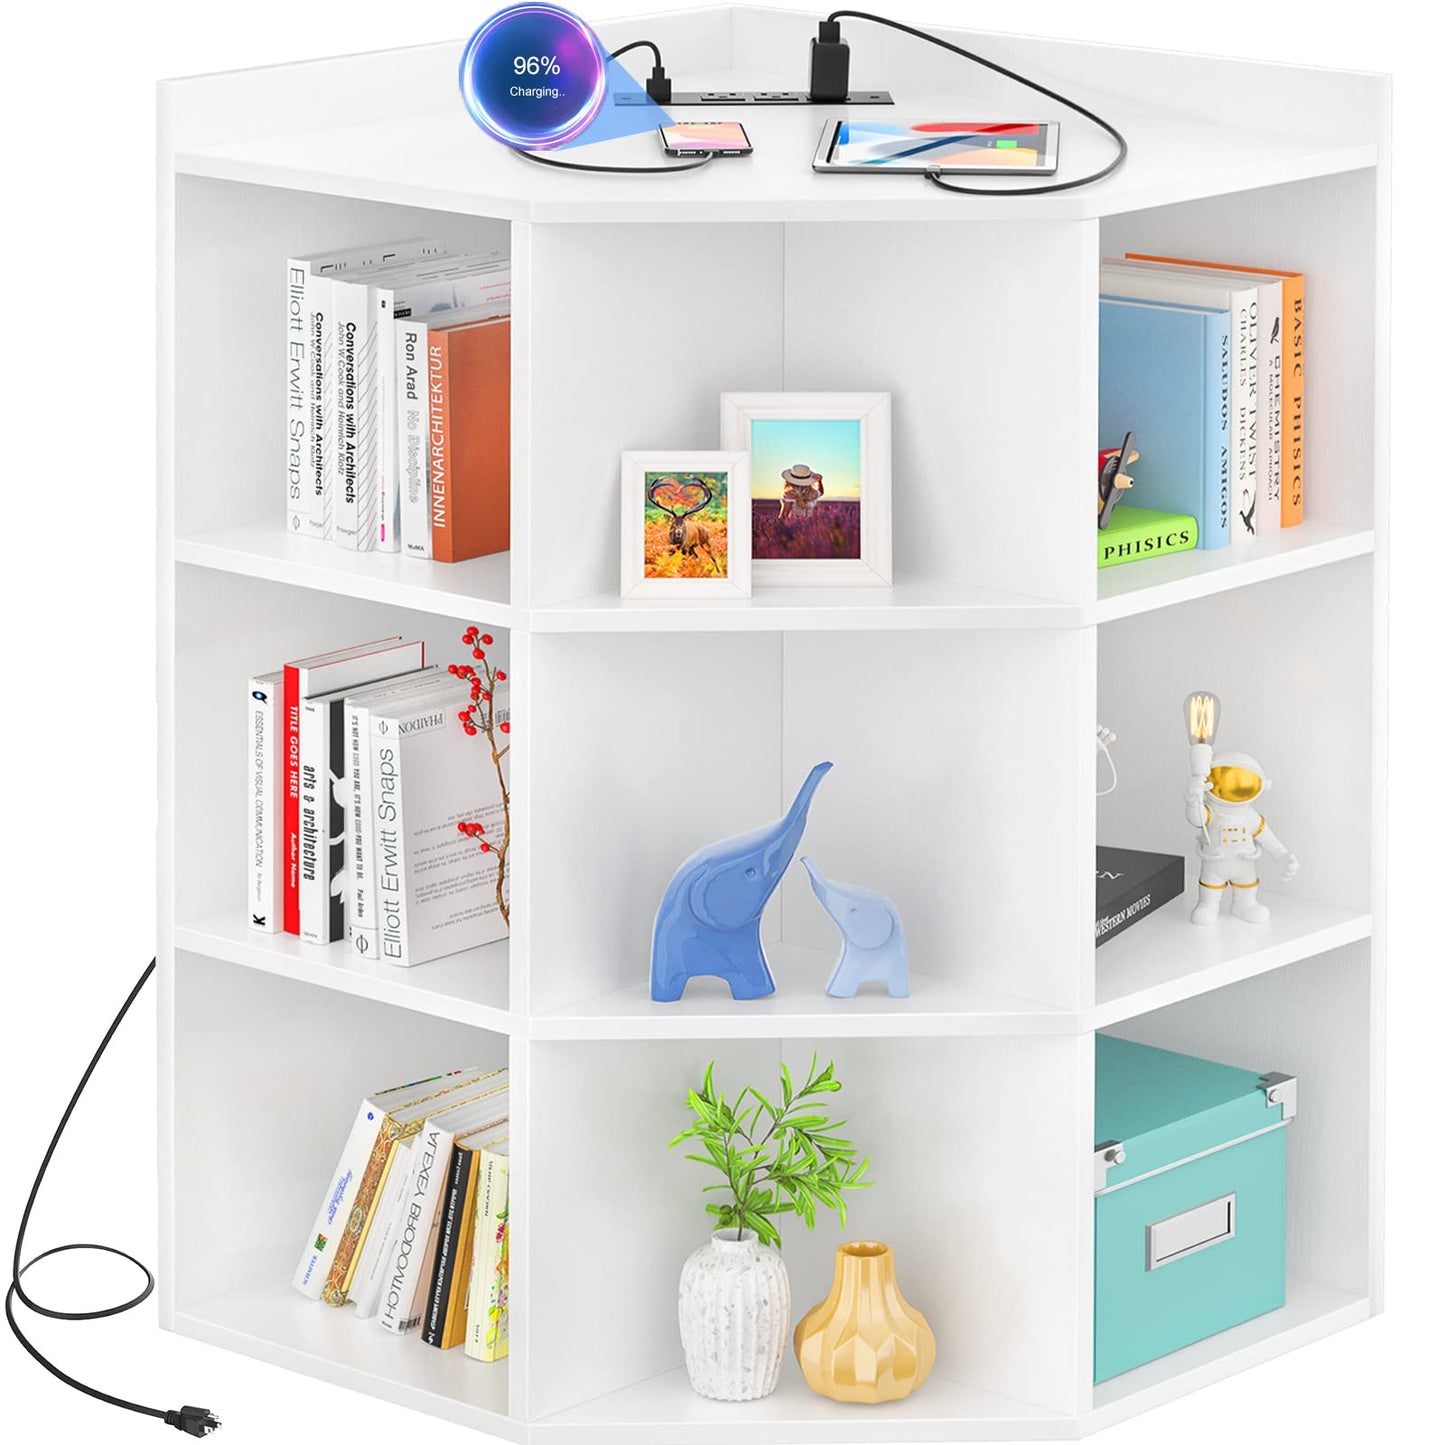 Aheaplus Corner Cabinet, Corner Storage with USB Ports and Outlets, Wooden Cubby Corner Bookshelf with 9 Cubes for Small Space, Corner Cube Toy